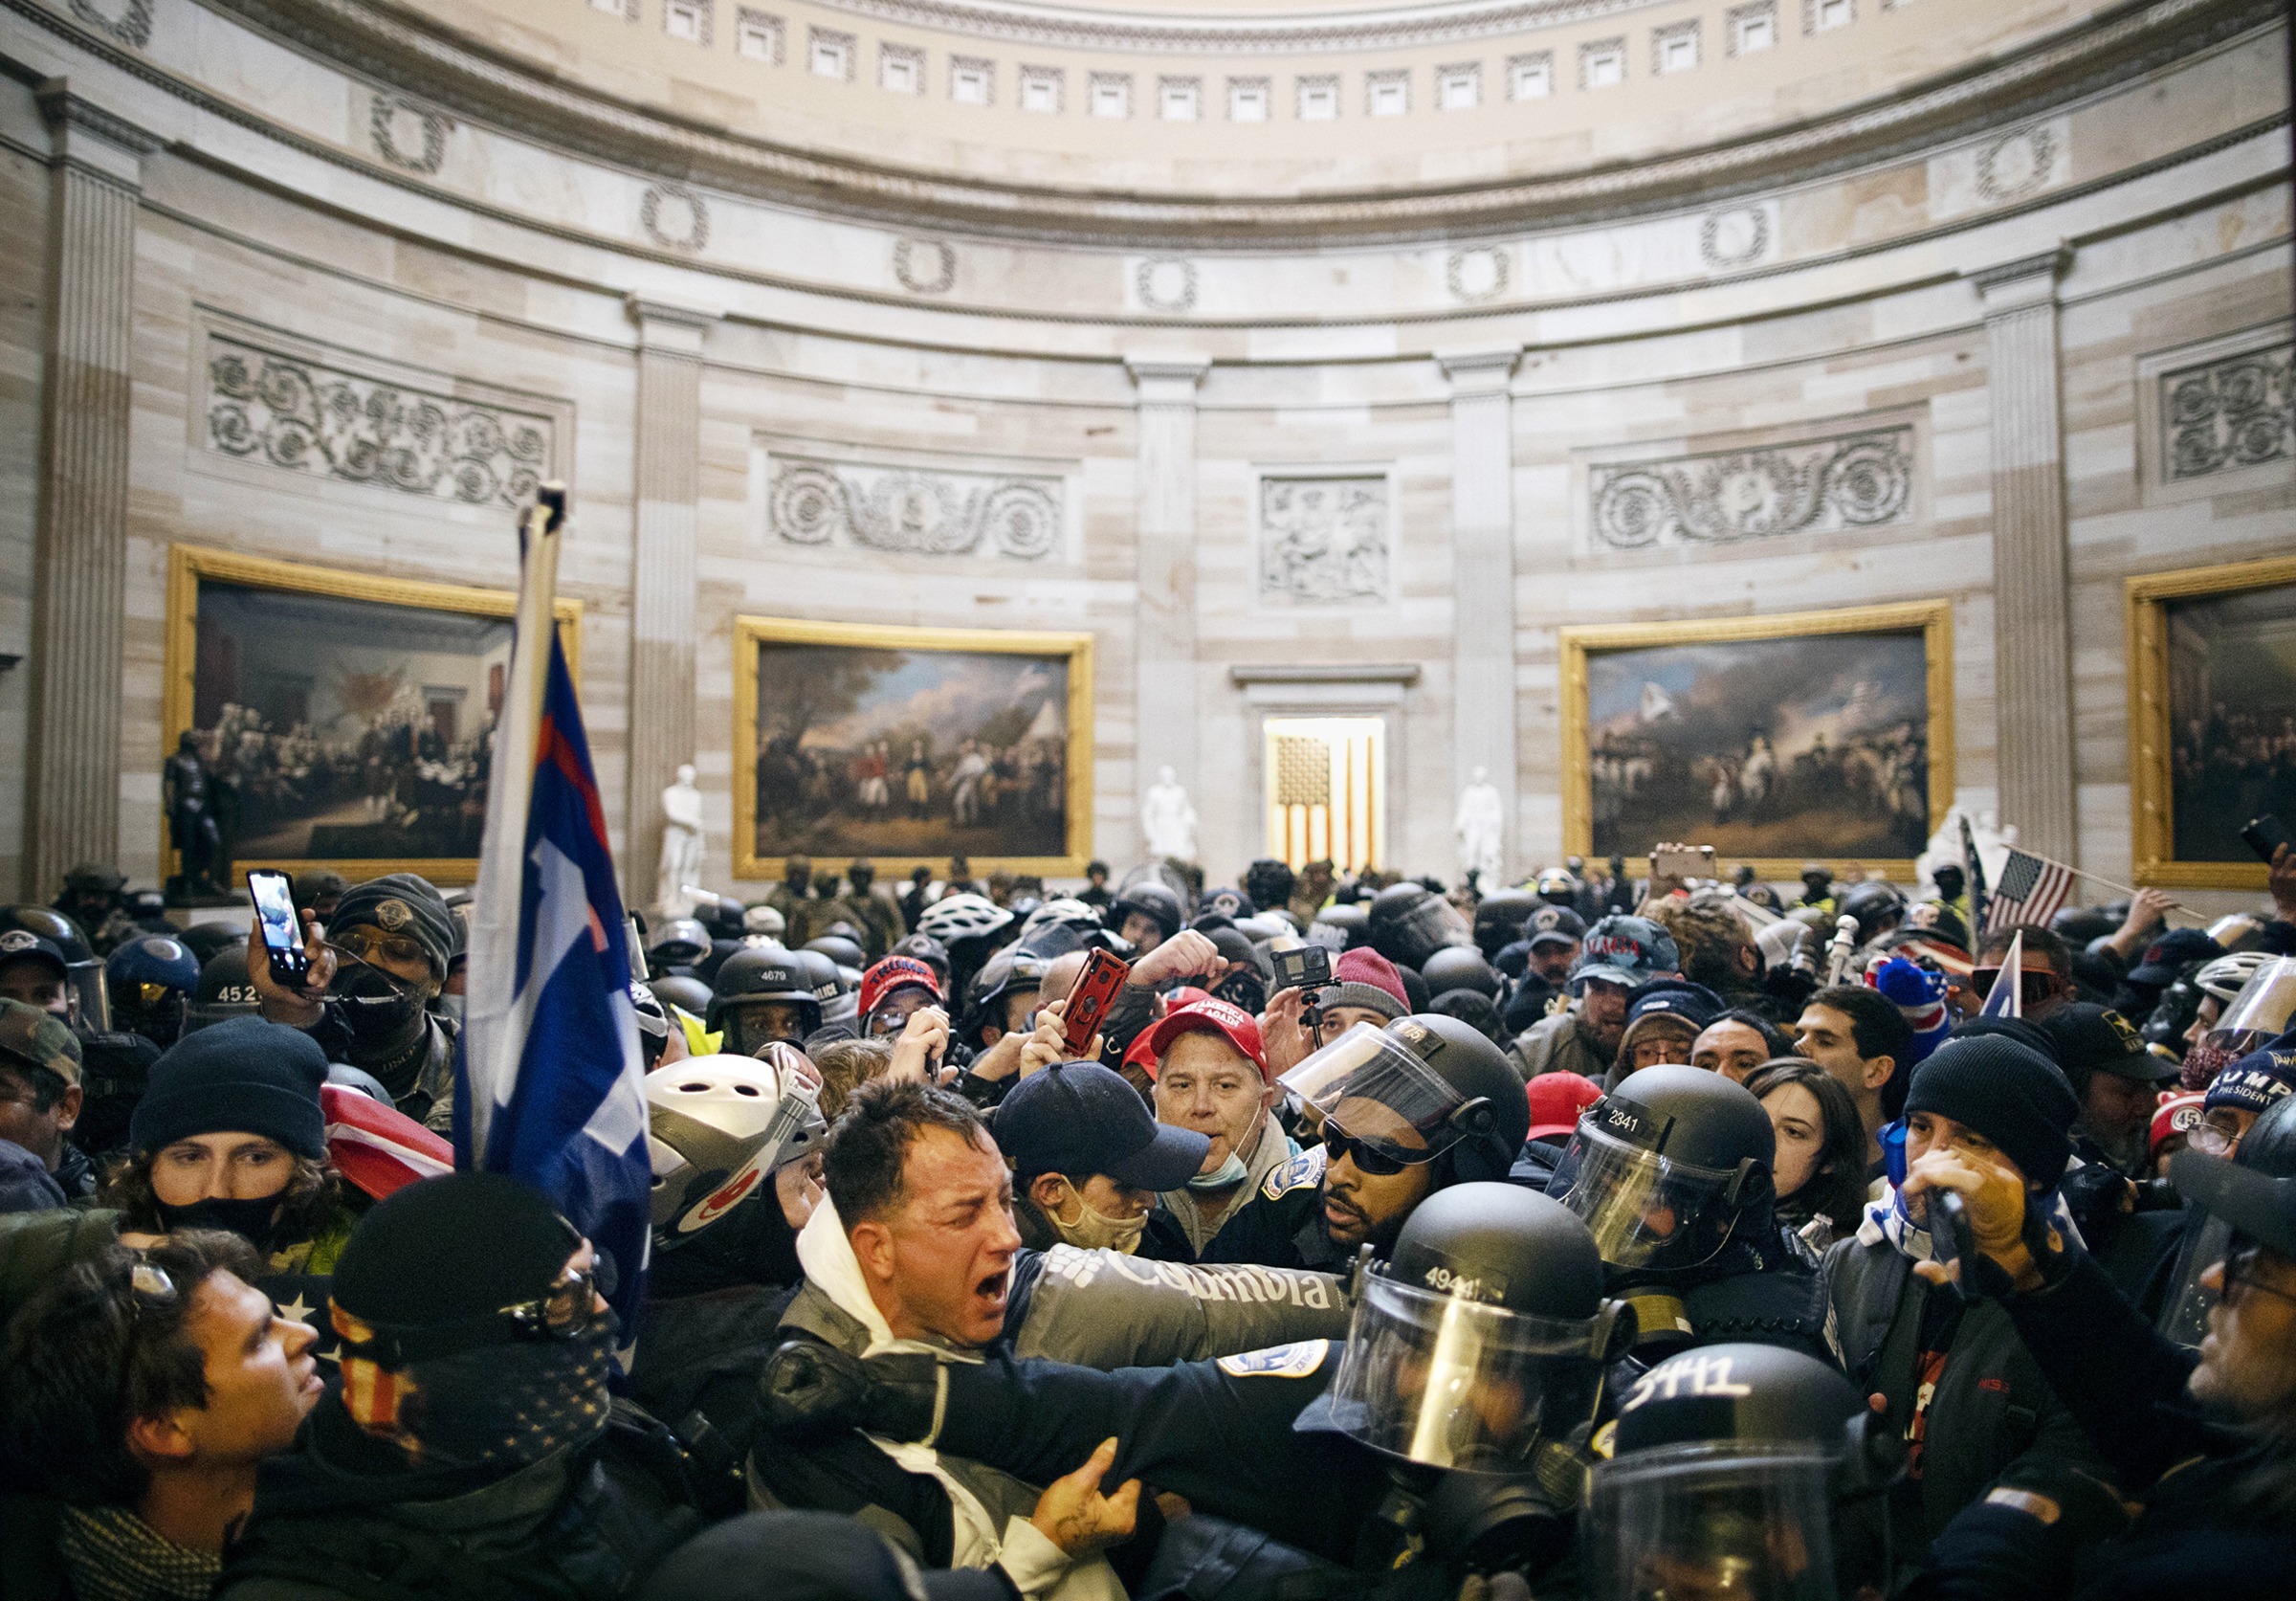 Police clash with Trump supporters in the Capitol rotunda after they breached the building on Jan. 6, 2021. (Mostafa Bassim—Anadolu Agency/Getty Images)